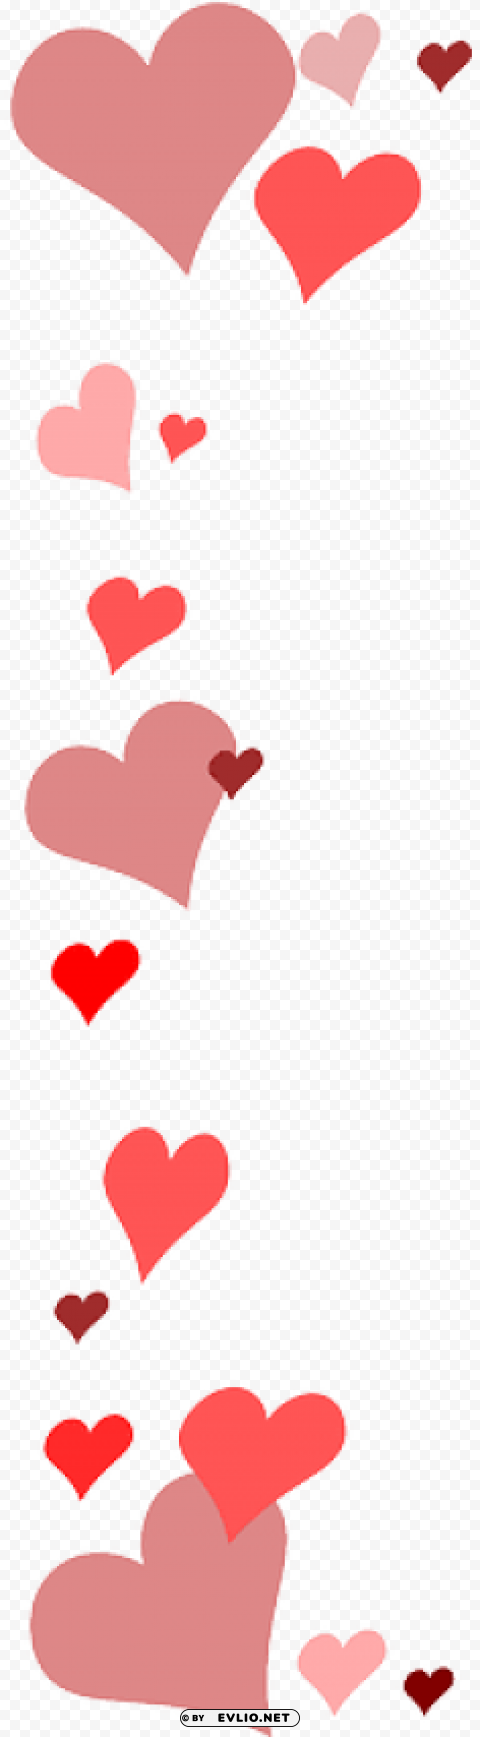 Red Heart Border PNG Transparent Stock Images